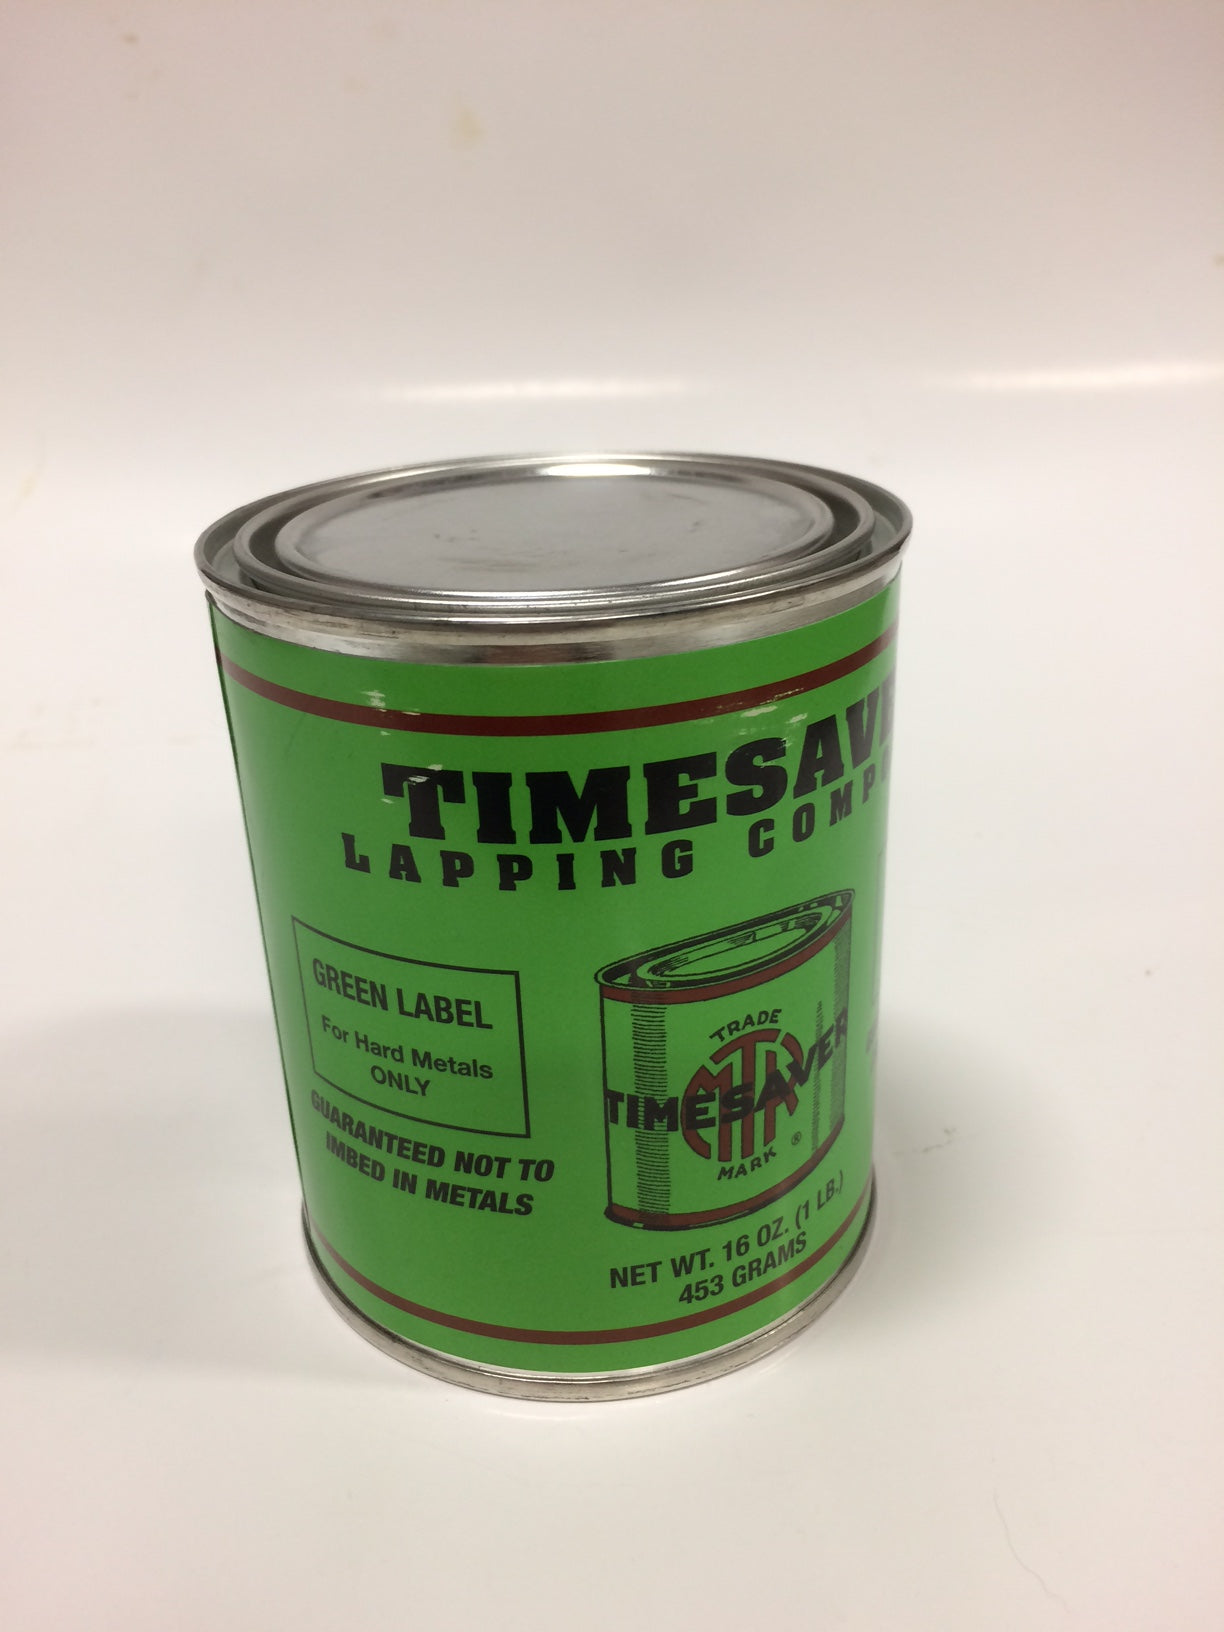 TIMESAVER Lapping Compound Yellow Label For Soft Metals 80 Fine